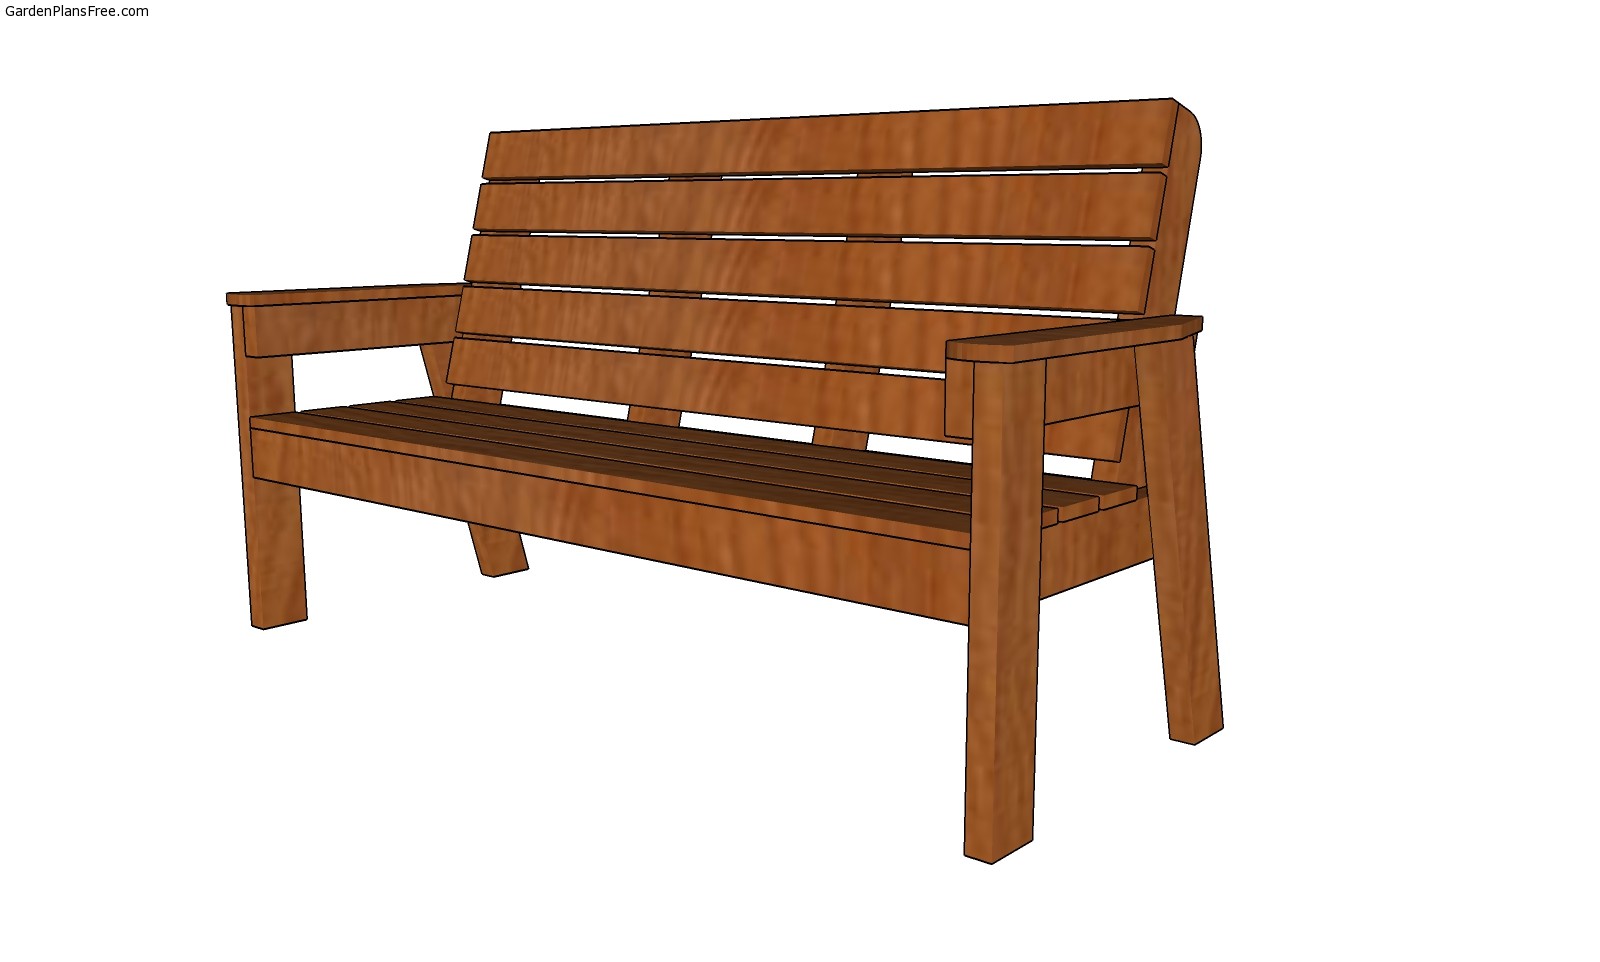 Patio Bench Plans Free Pdf Download Free Garden Plans How To Build Garden Projects